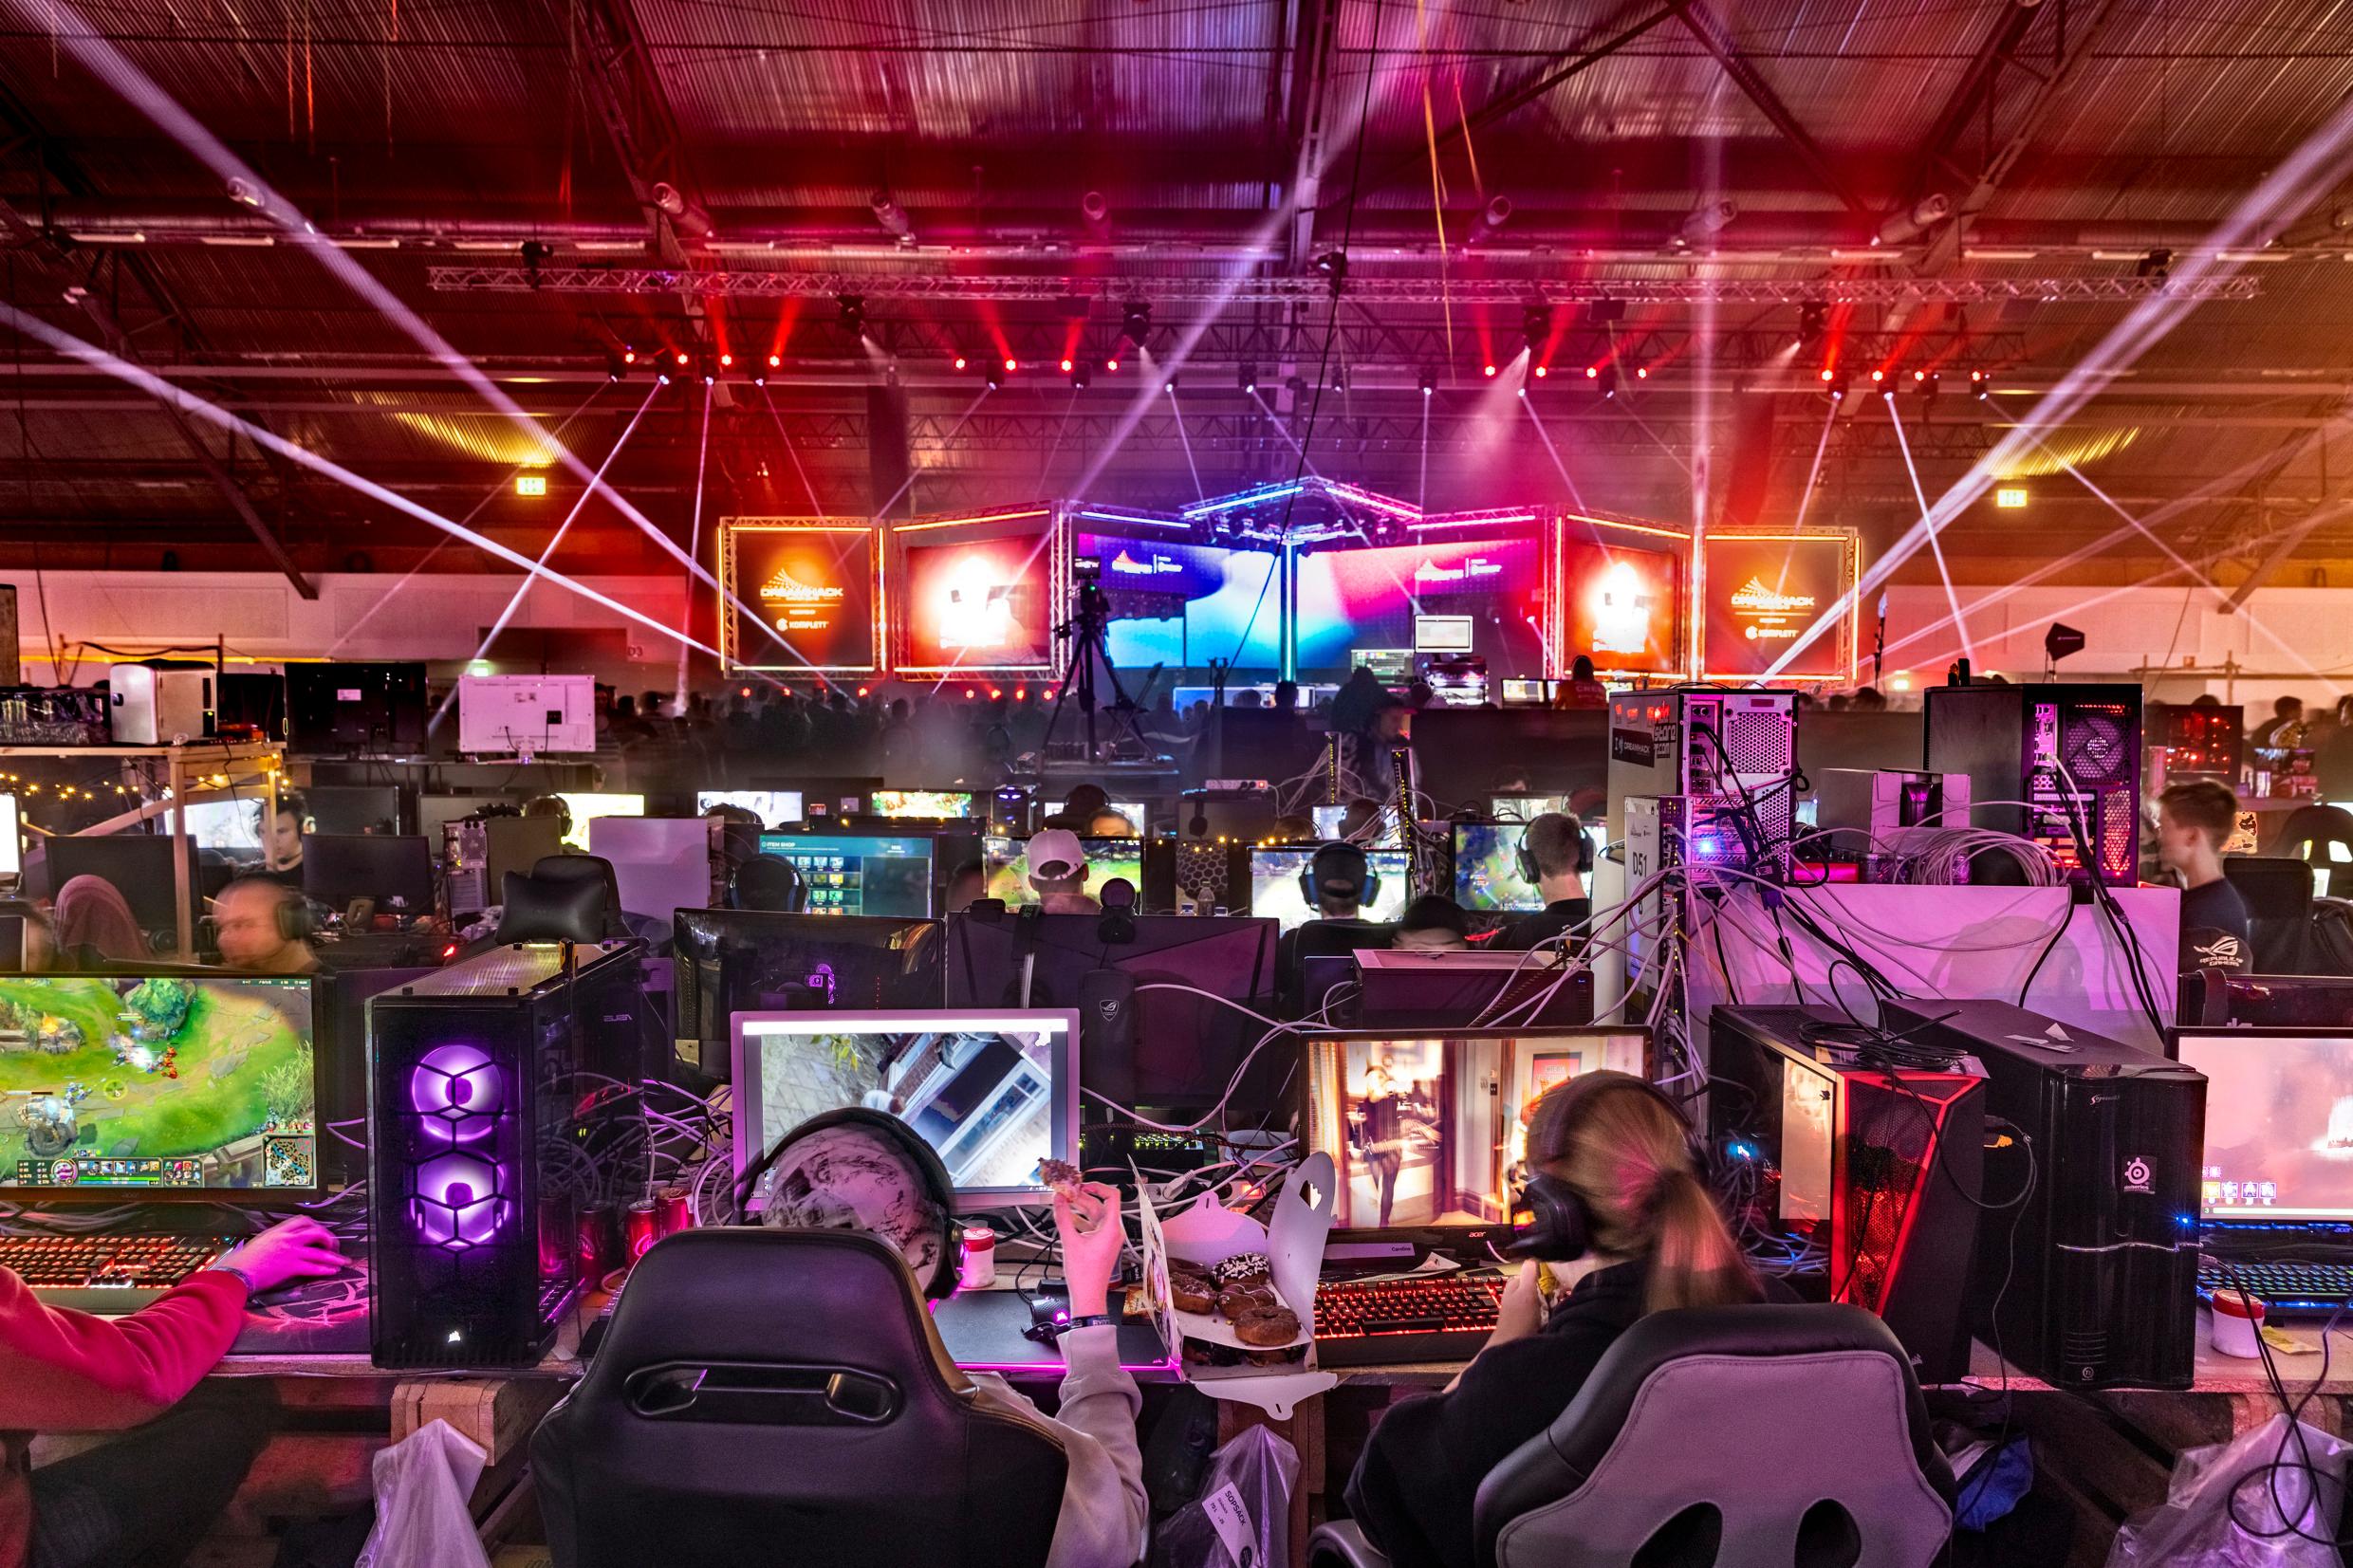 Lots of computers and gamers at the DreamHack digital festival.